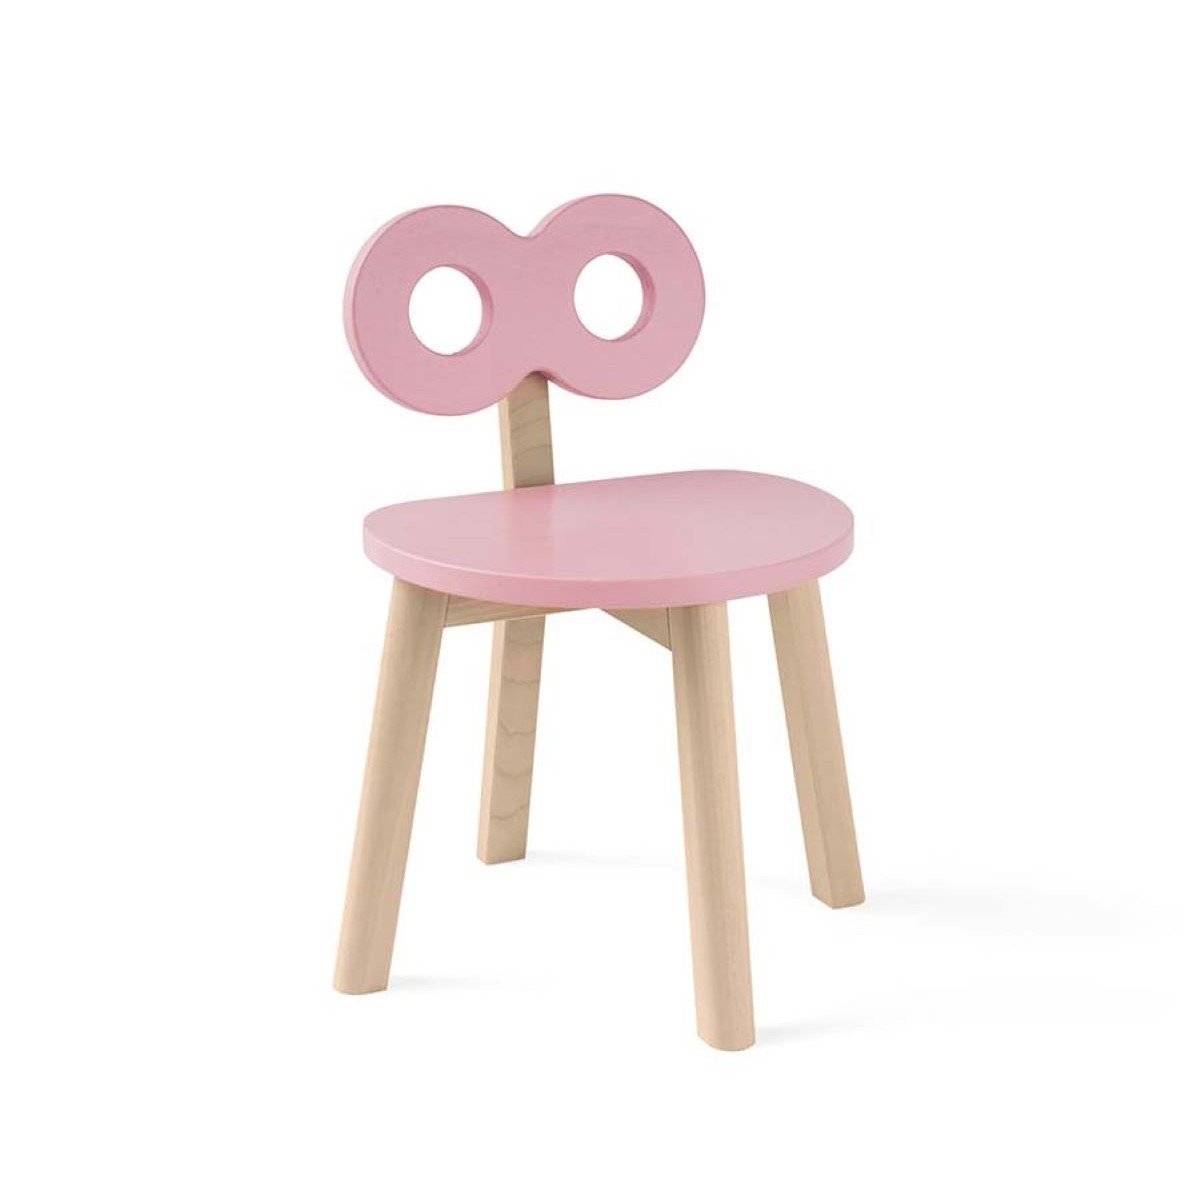 Ooh Noo Double-O Chair in Pink - Scandibørn